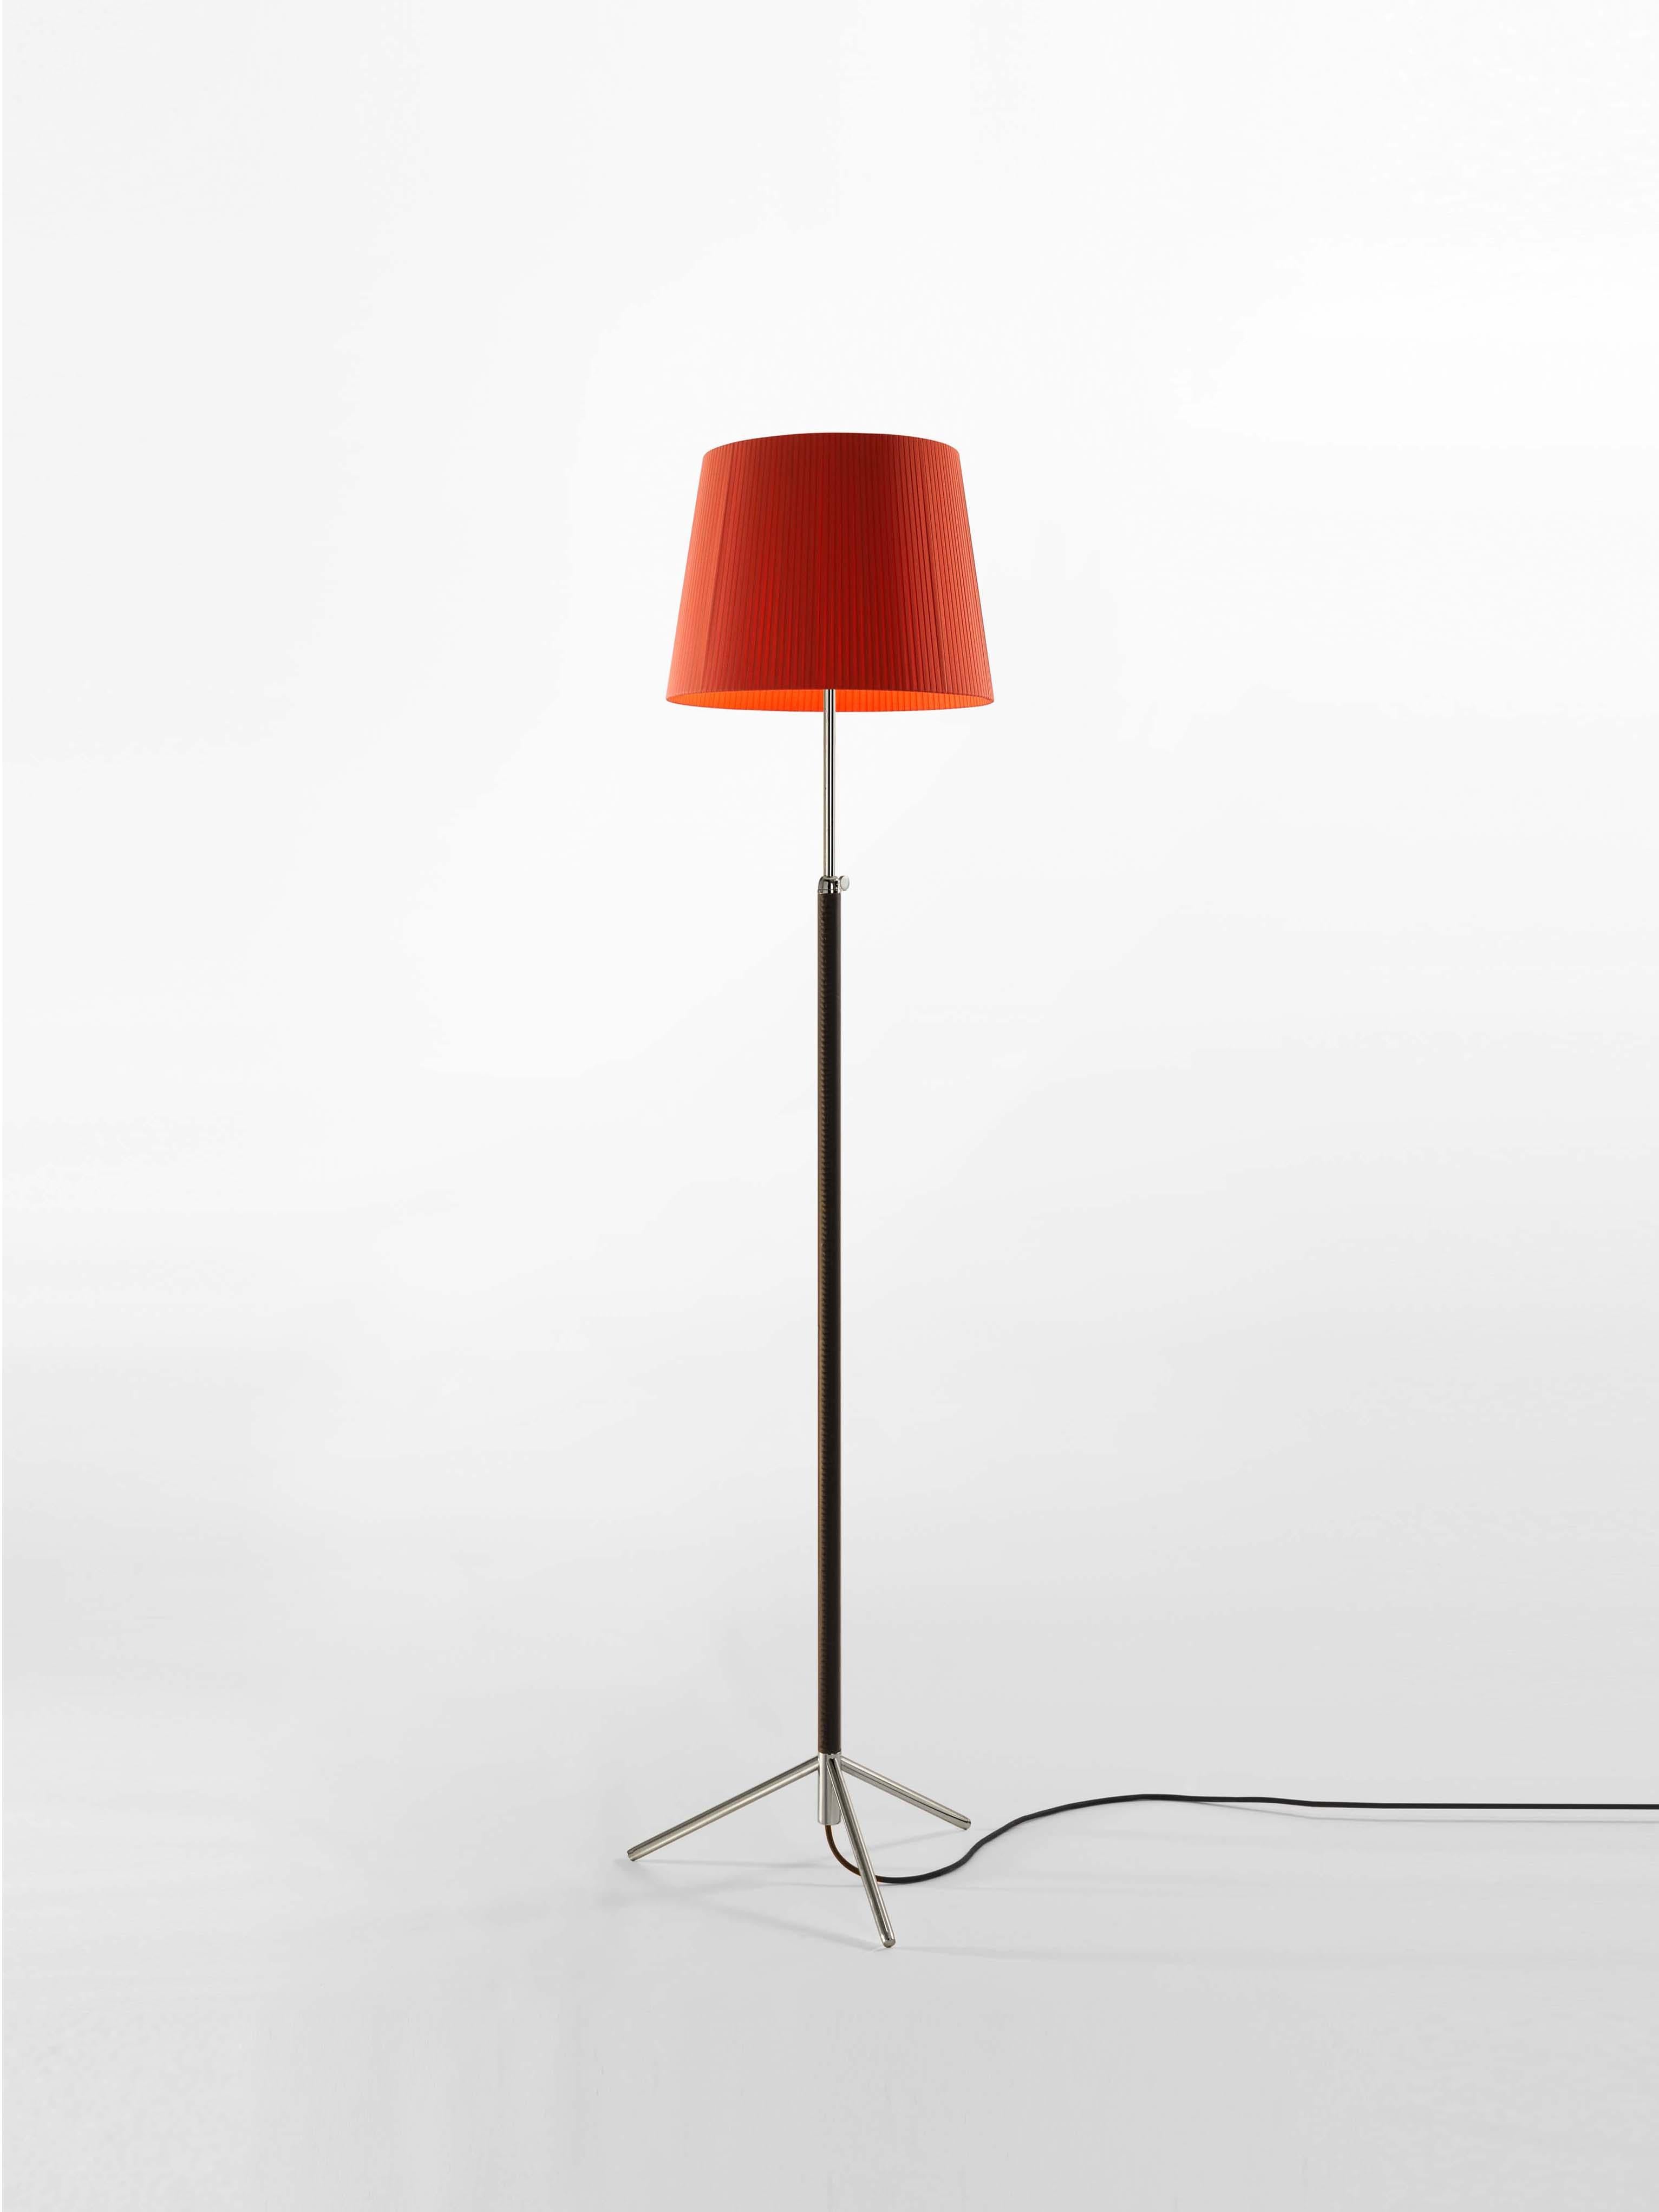 Red and chrome Pie de Salón G3 floor lamp by Jaume Sans
Dimensions: D 40 x H 120-160 cm
Materials: Metal, leather, ribbon.
Available in chrome-plated or polished brass structure.
Available in other shade colors and sizes.

This slender